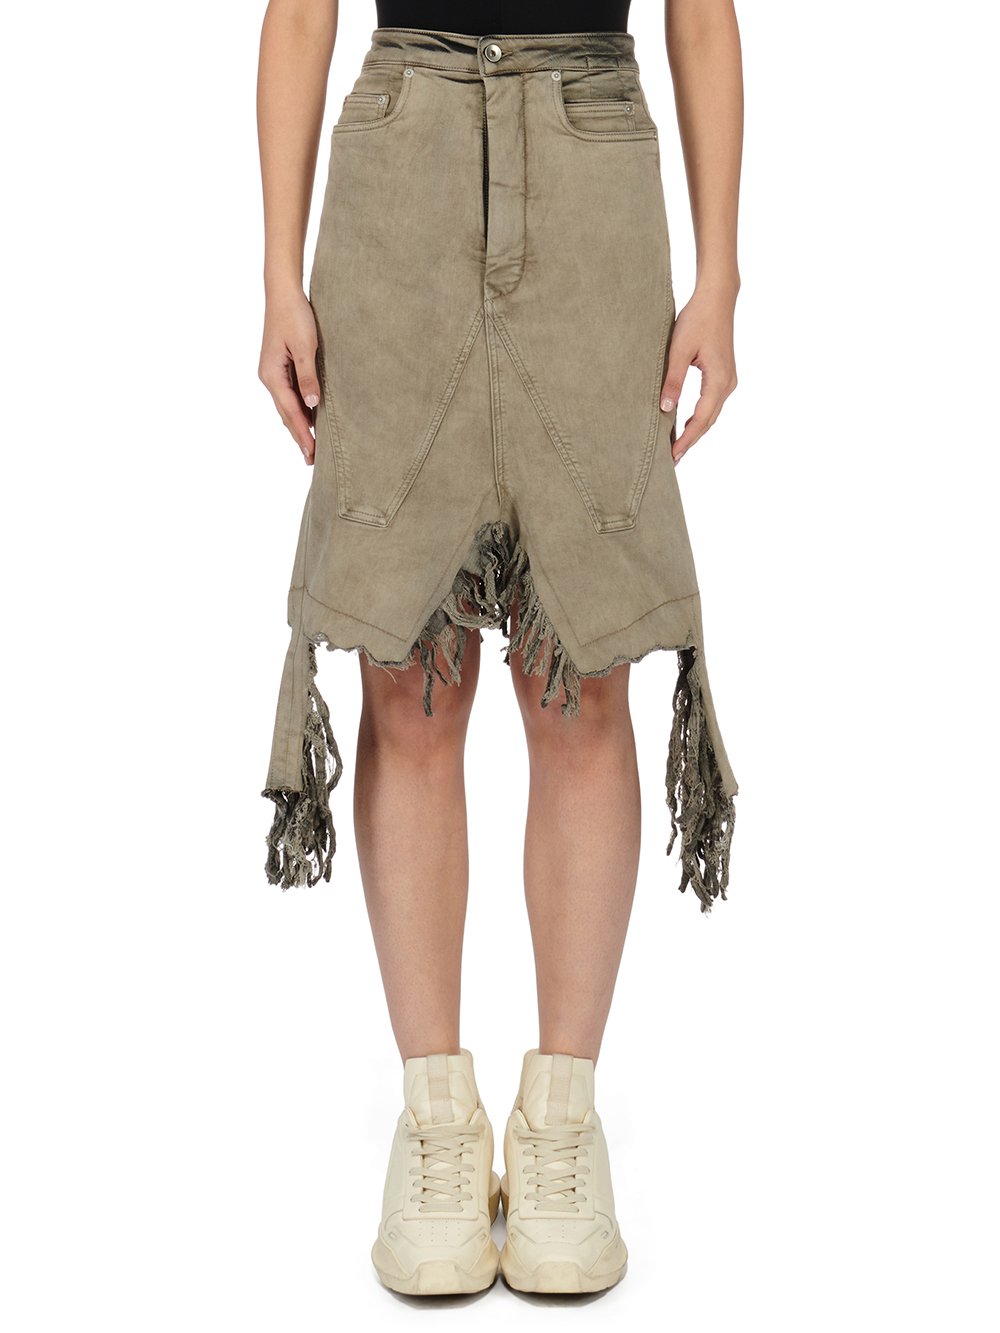 RICK OWENS FW23 LUXOR SLIVERED SKIRT IN MINERAL PEARL STRETCH DENIM